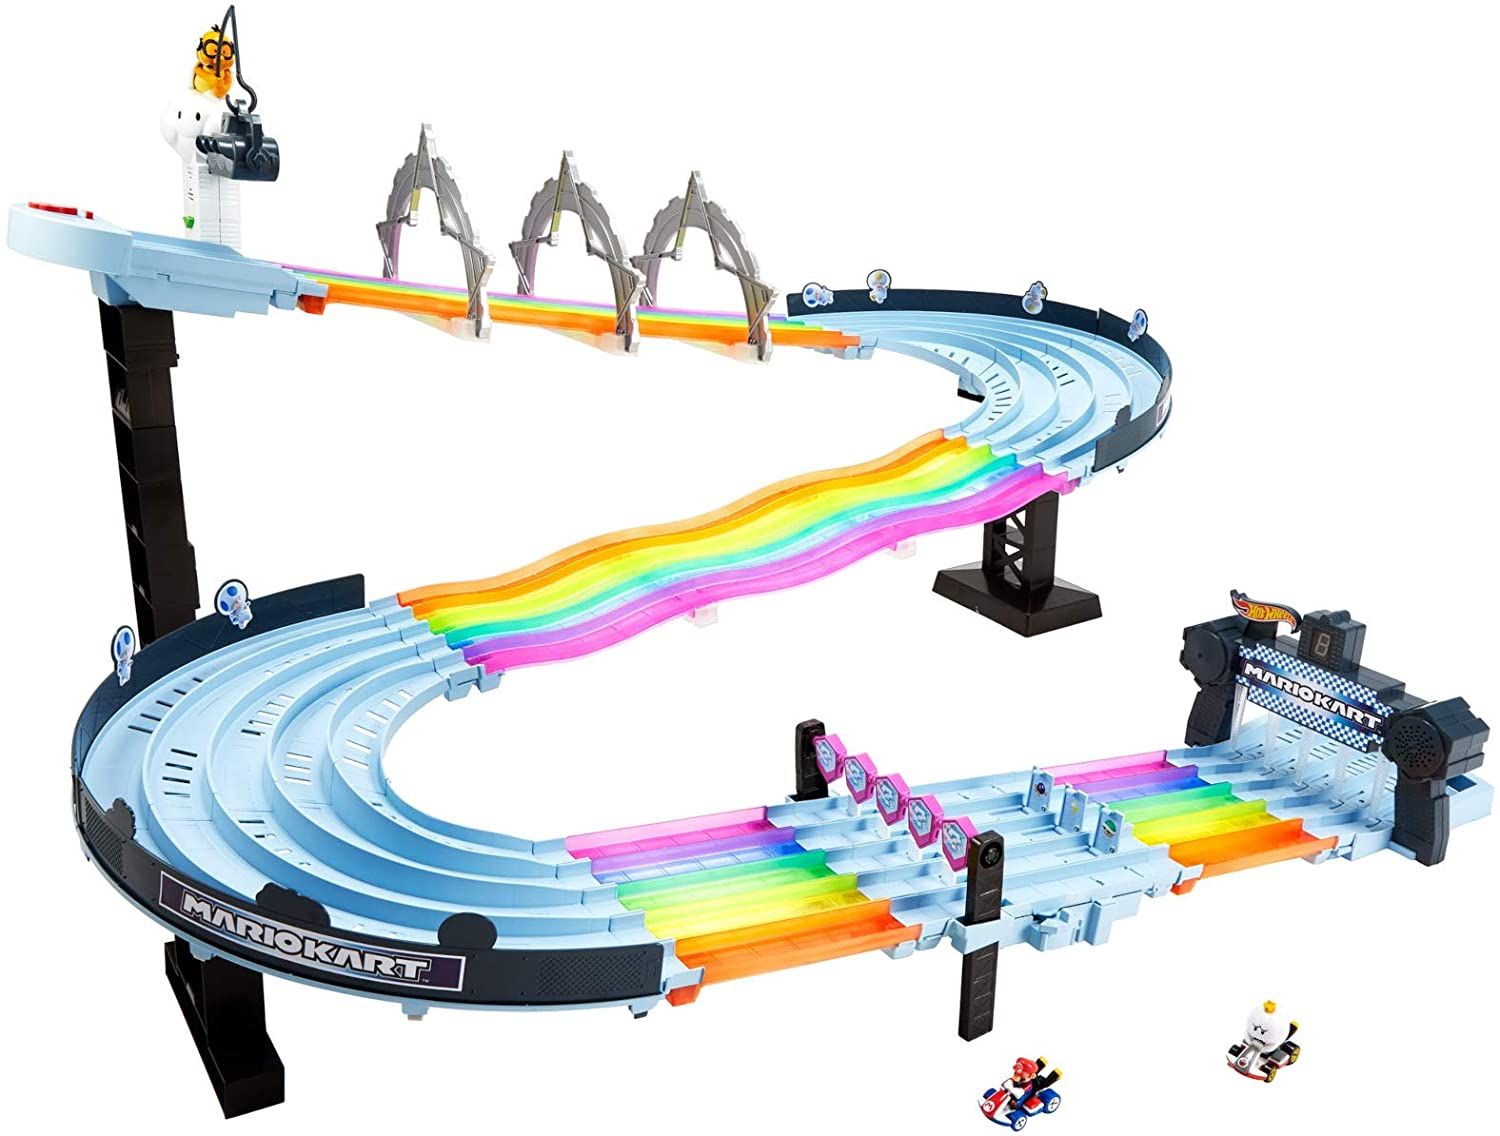 Mario Kart's Rainbow Road Hot Wheels Set Is Up For Preorder on Amazon full set